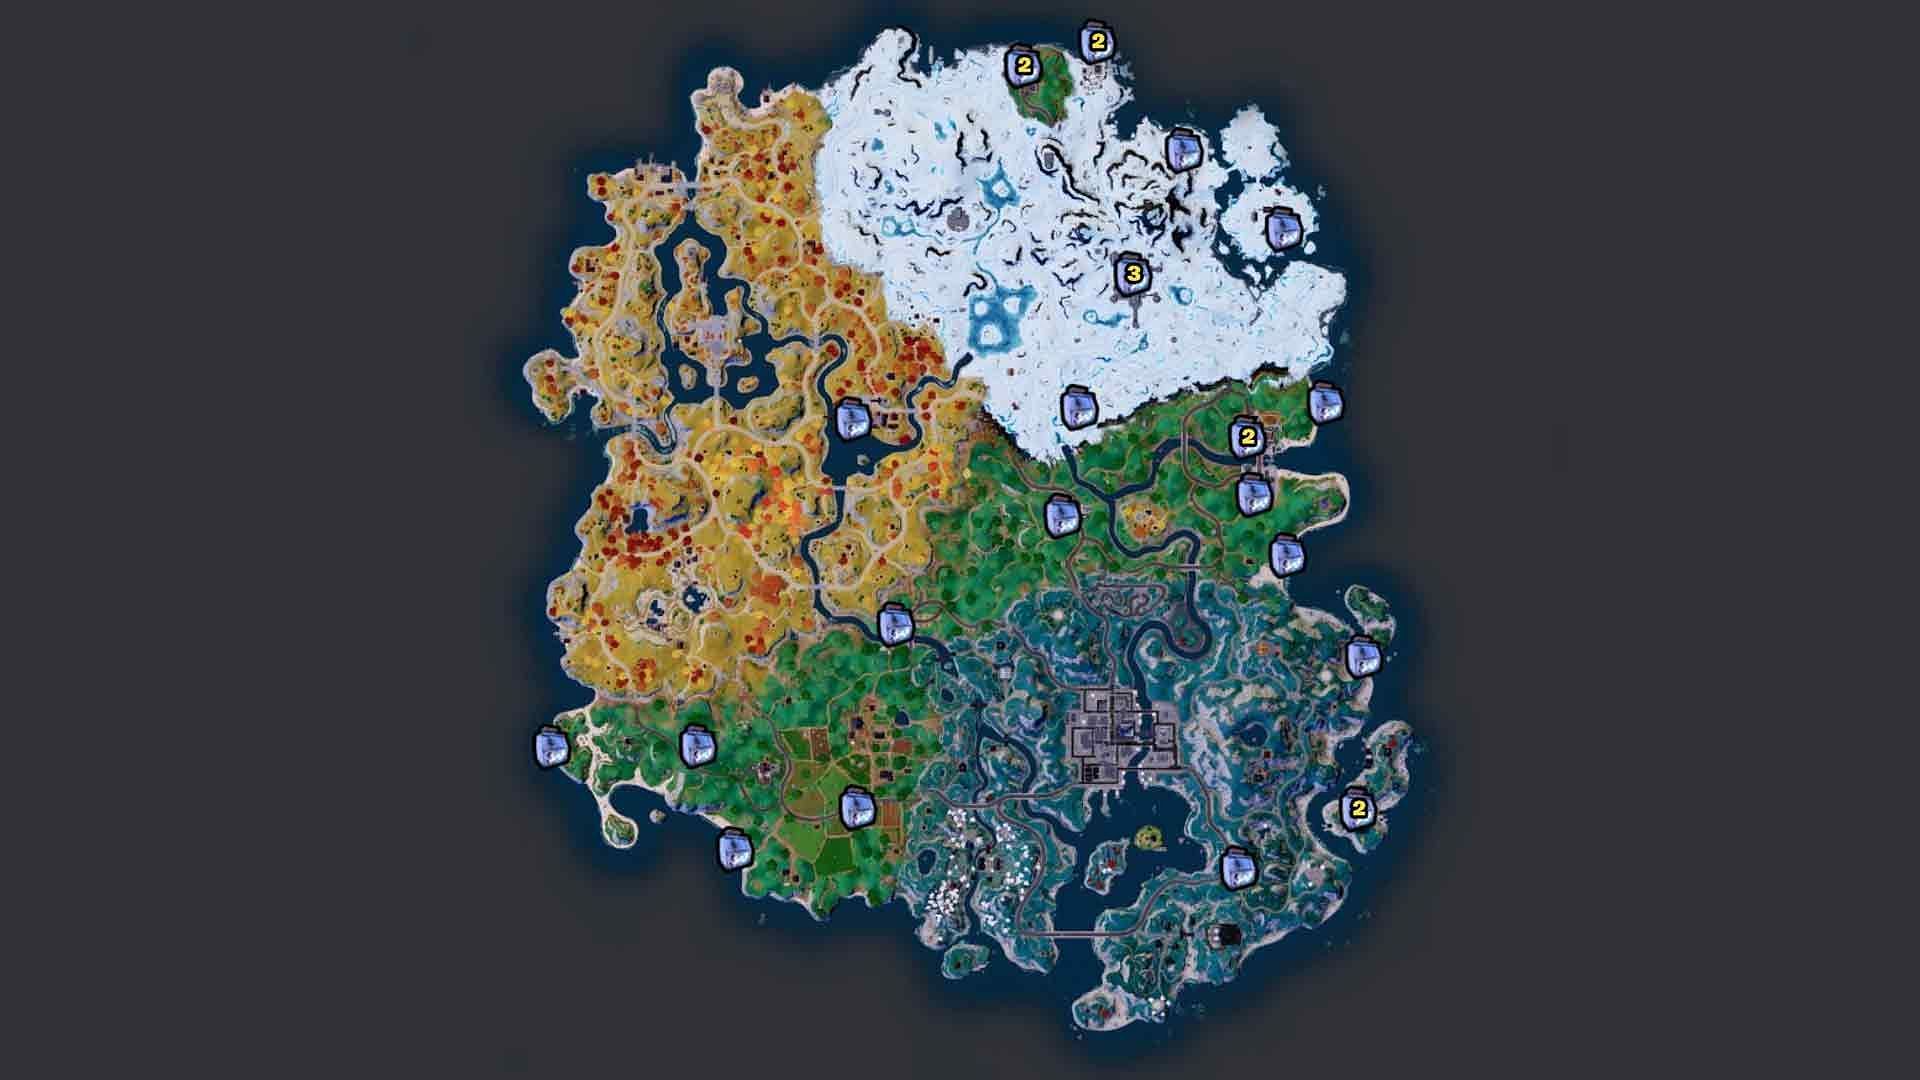 There are around 30 Ice Machines currently in Fortnite Battle Royale (Image via fortnite.gg / website screenshot)